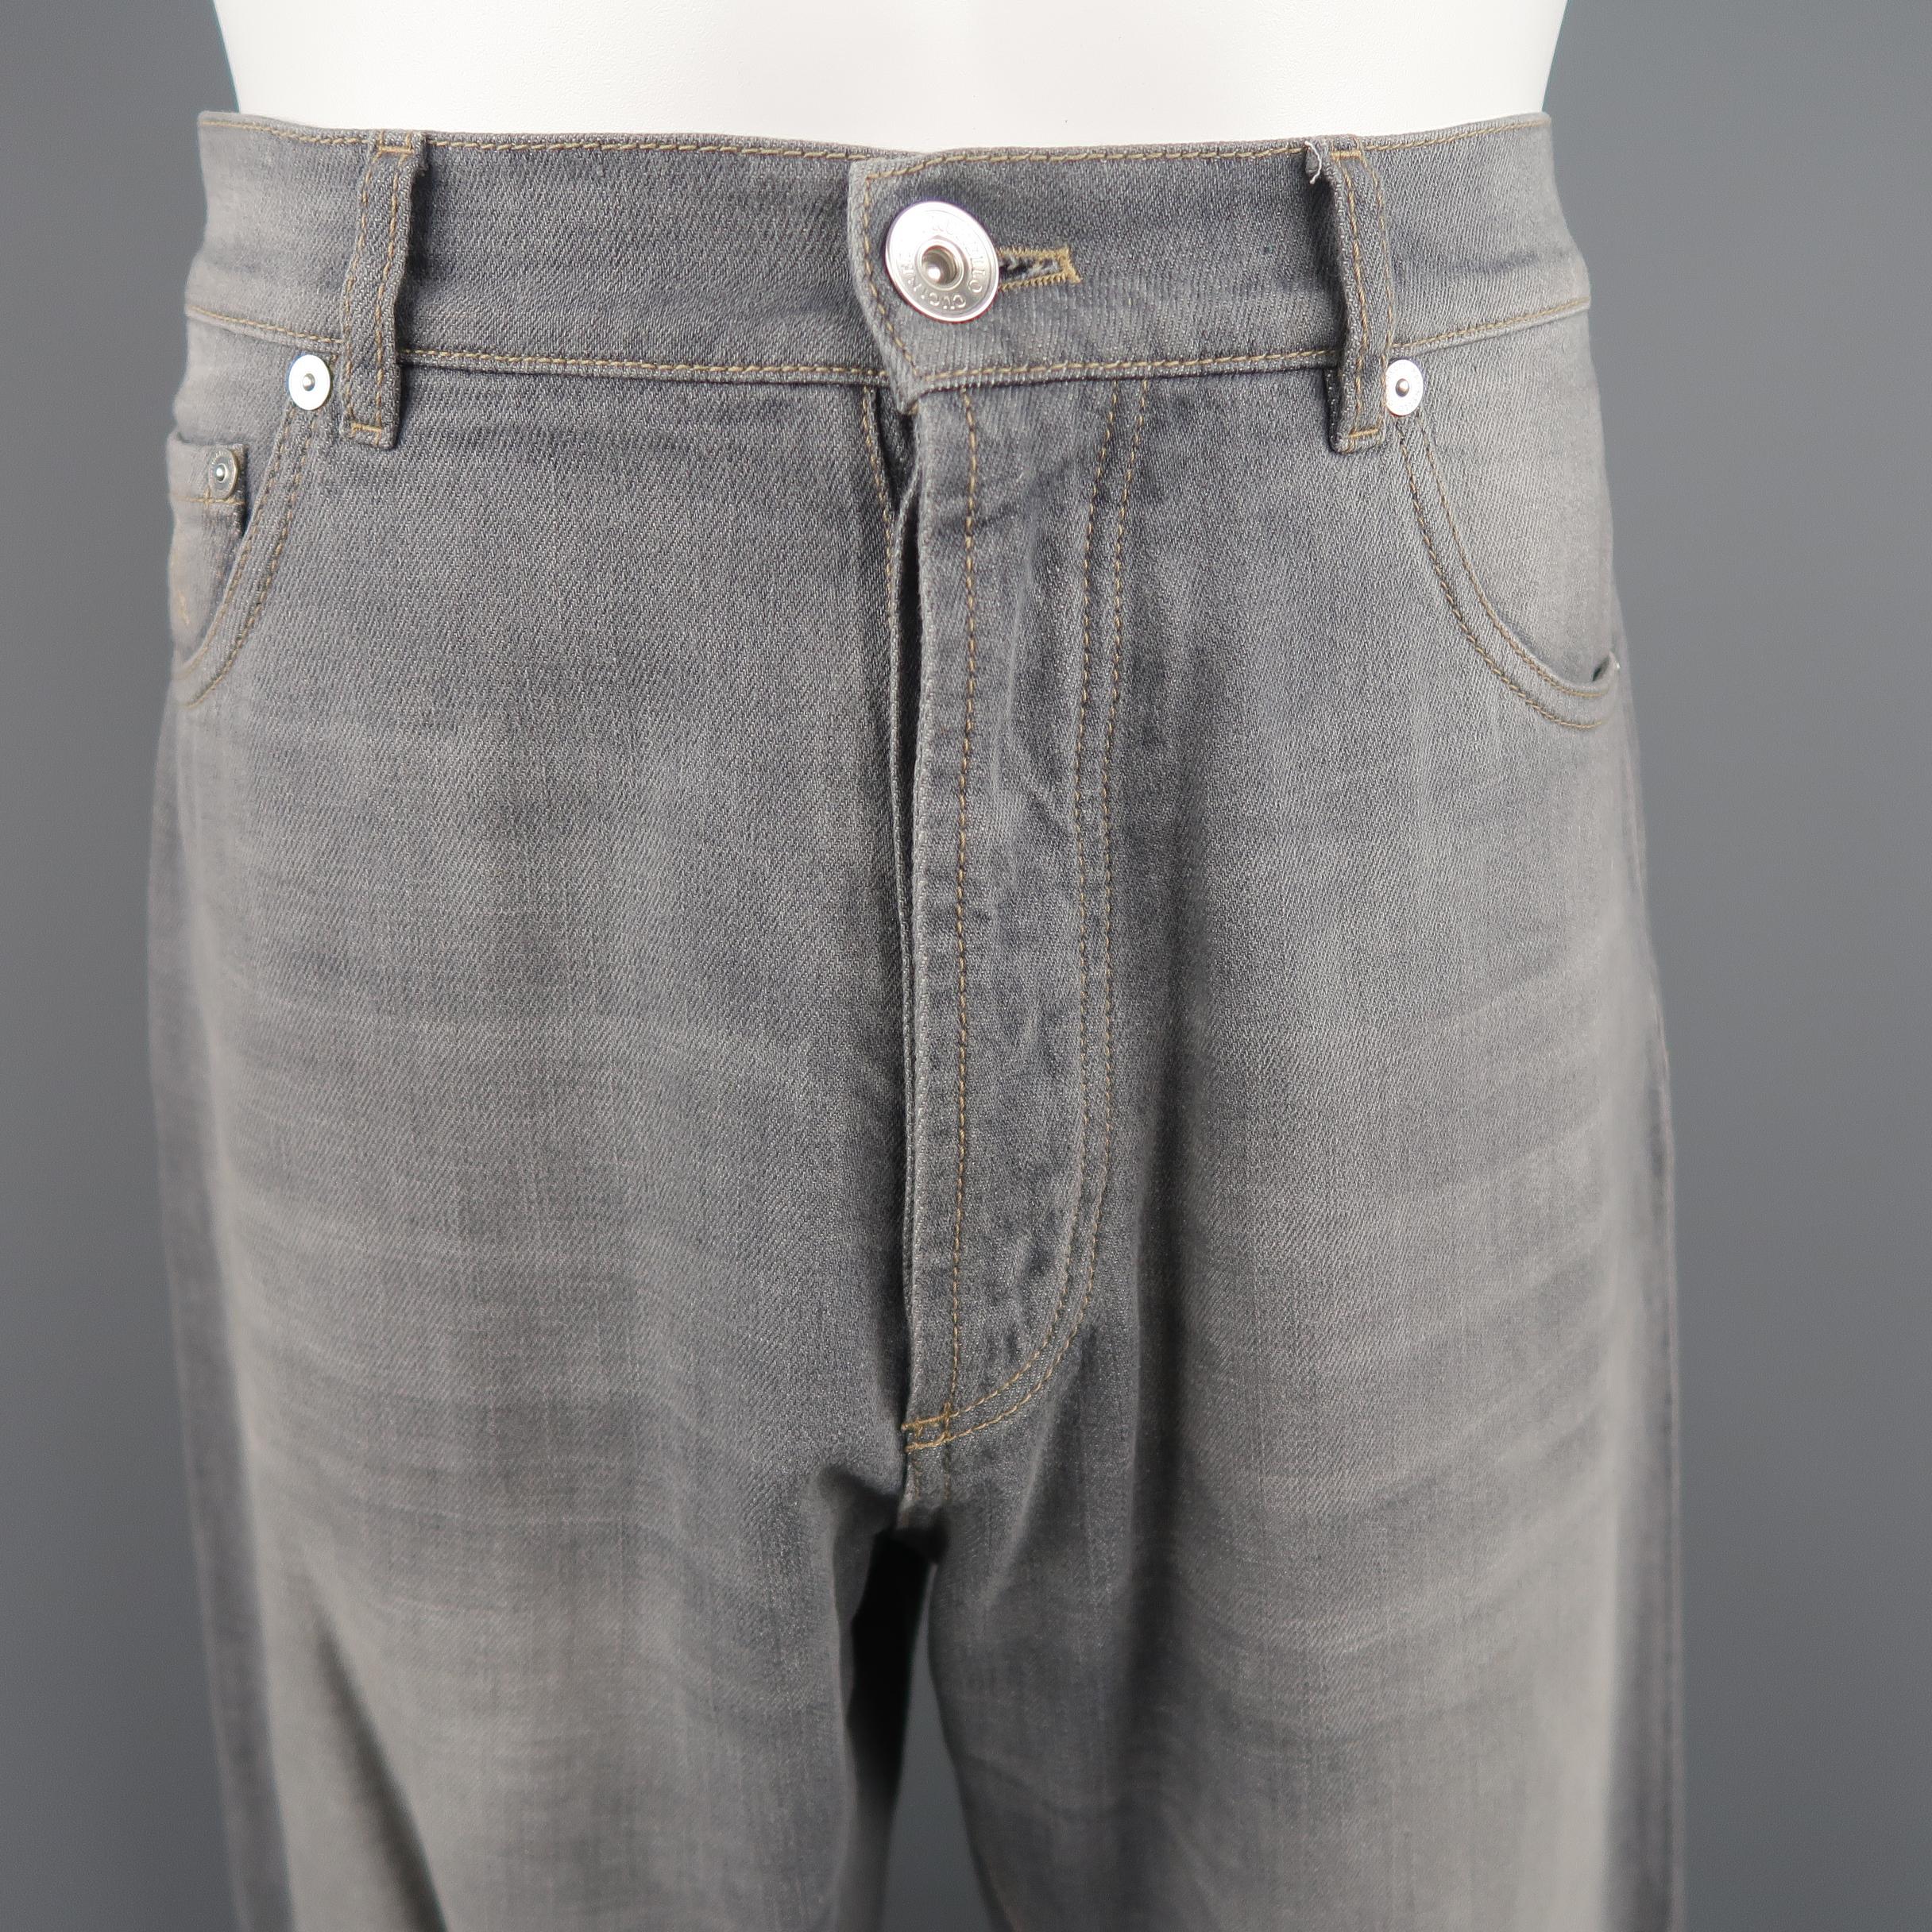 BRUNELLO CUCINELLI jeans come in light gray washed denim with a button fly and darted knee. Made in Italy.
 
Good Pre-Owned Condition. Retails: $795.00.
Marked: Leisure Fit (no size)
 
Measurements:
 
Waist: 34 in.
Rise: 12 in.
Inseam: 34 in.